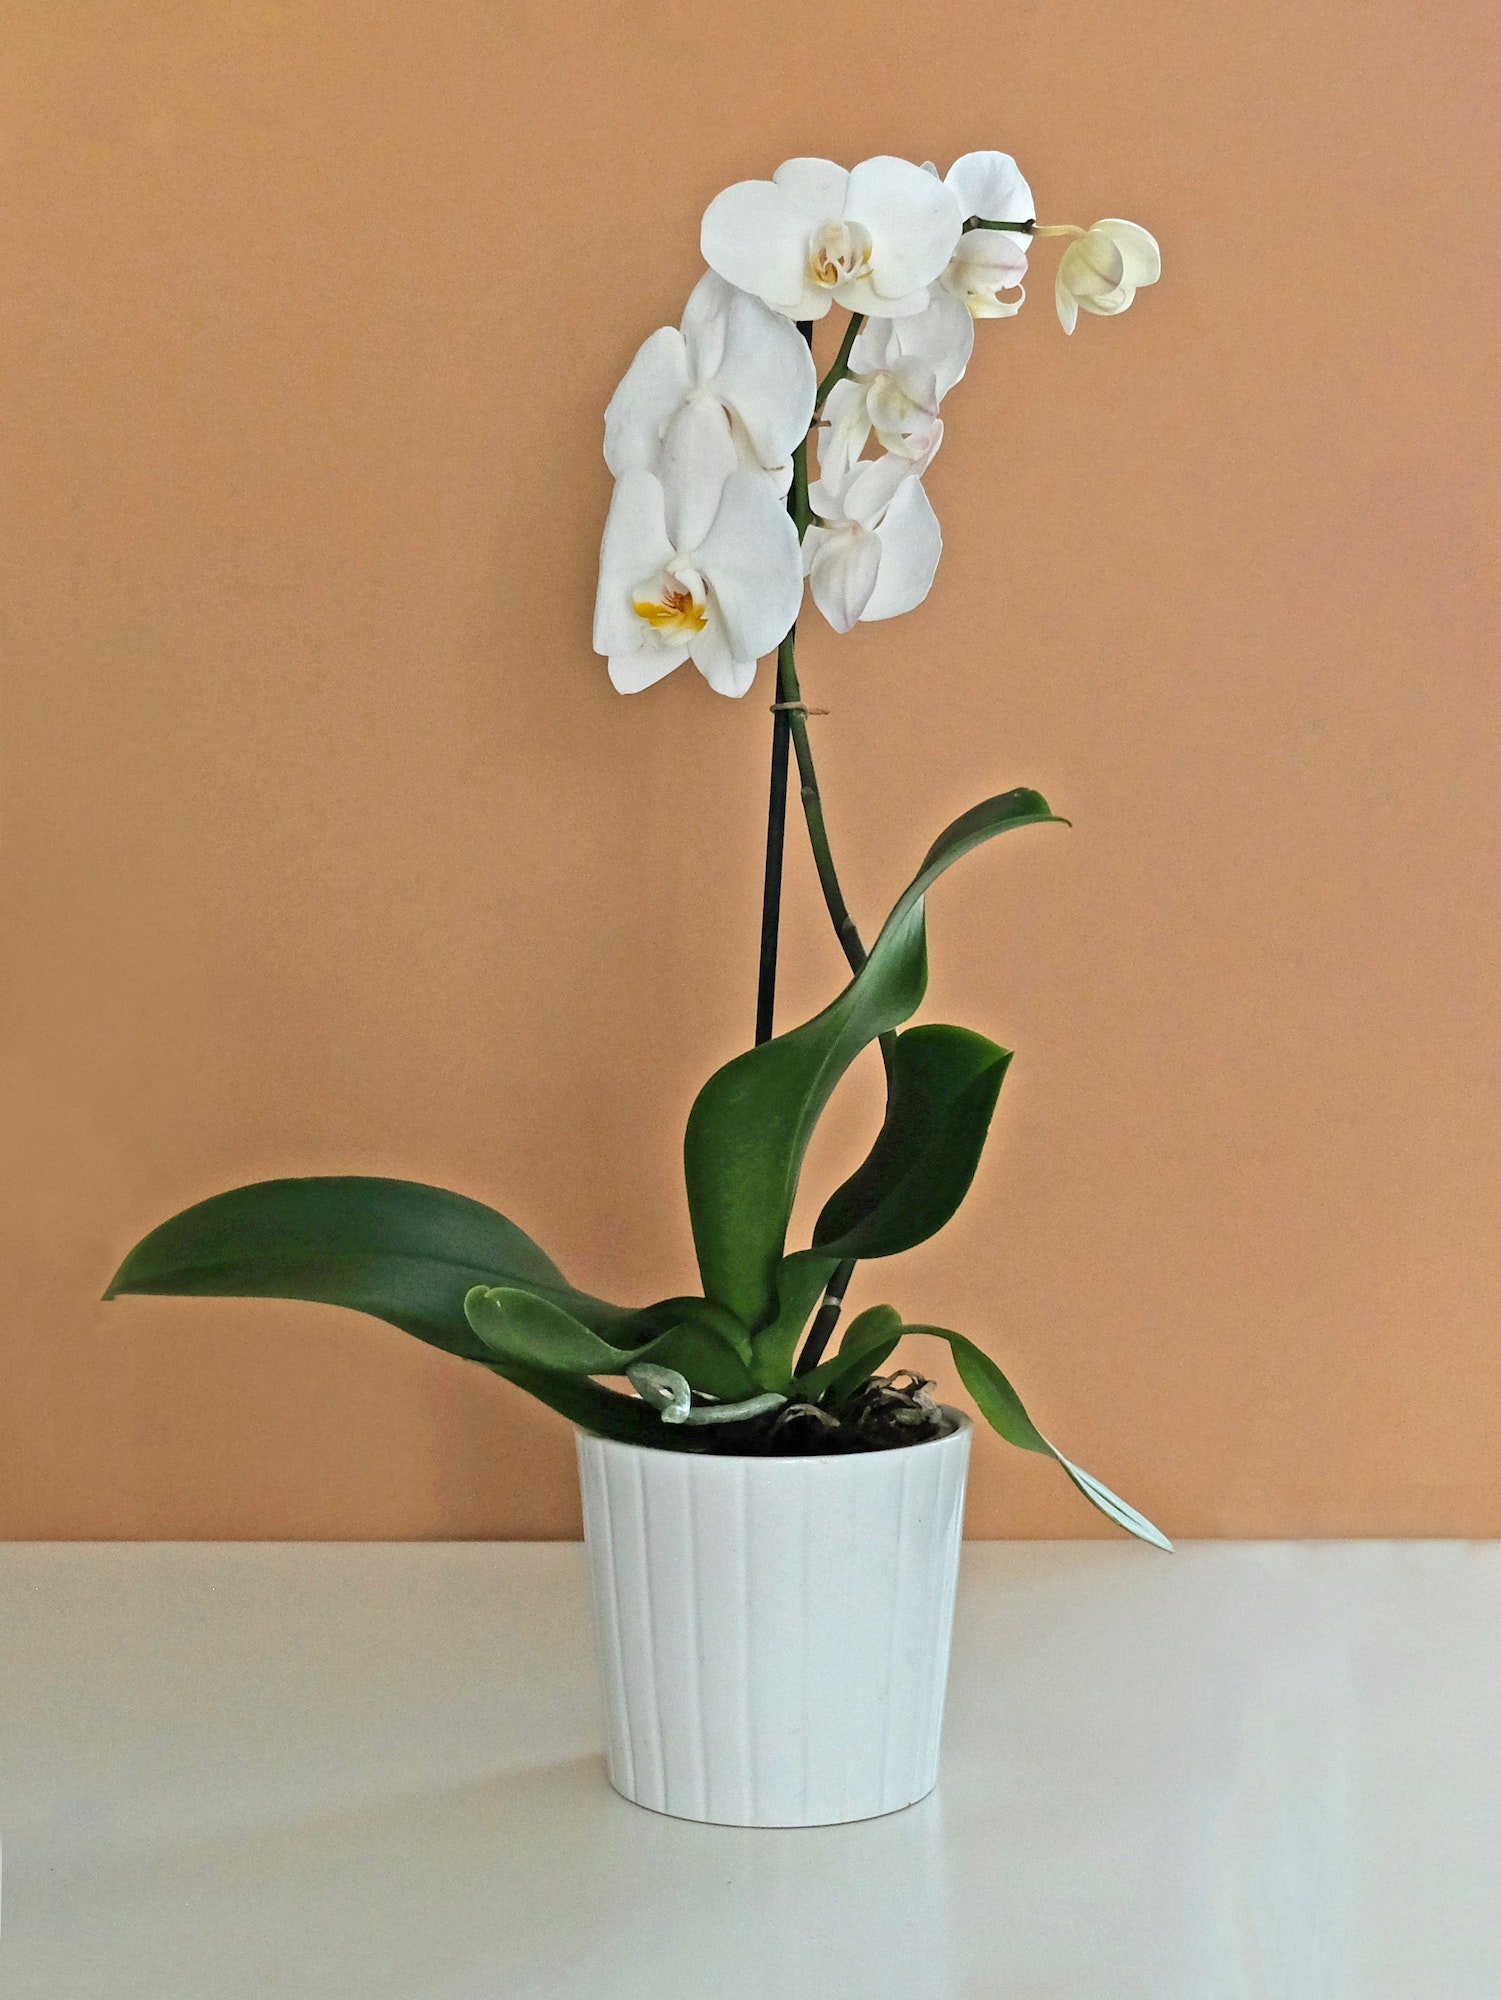 /Nominated/ Blooming orchid plant. Phalaenopsis orchid.